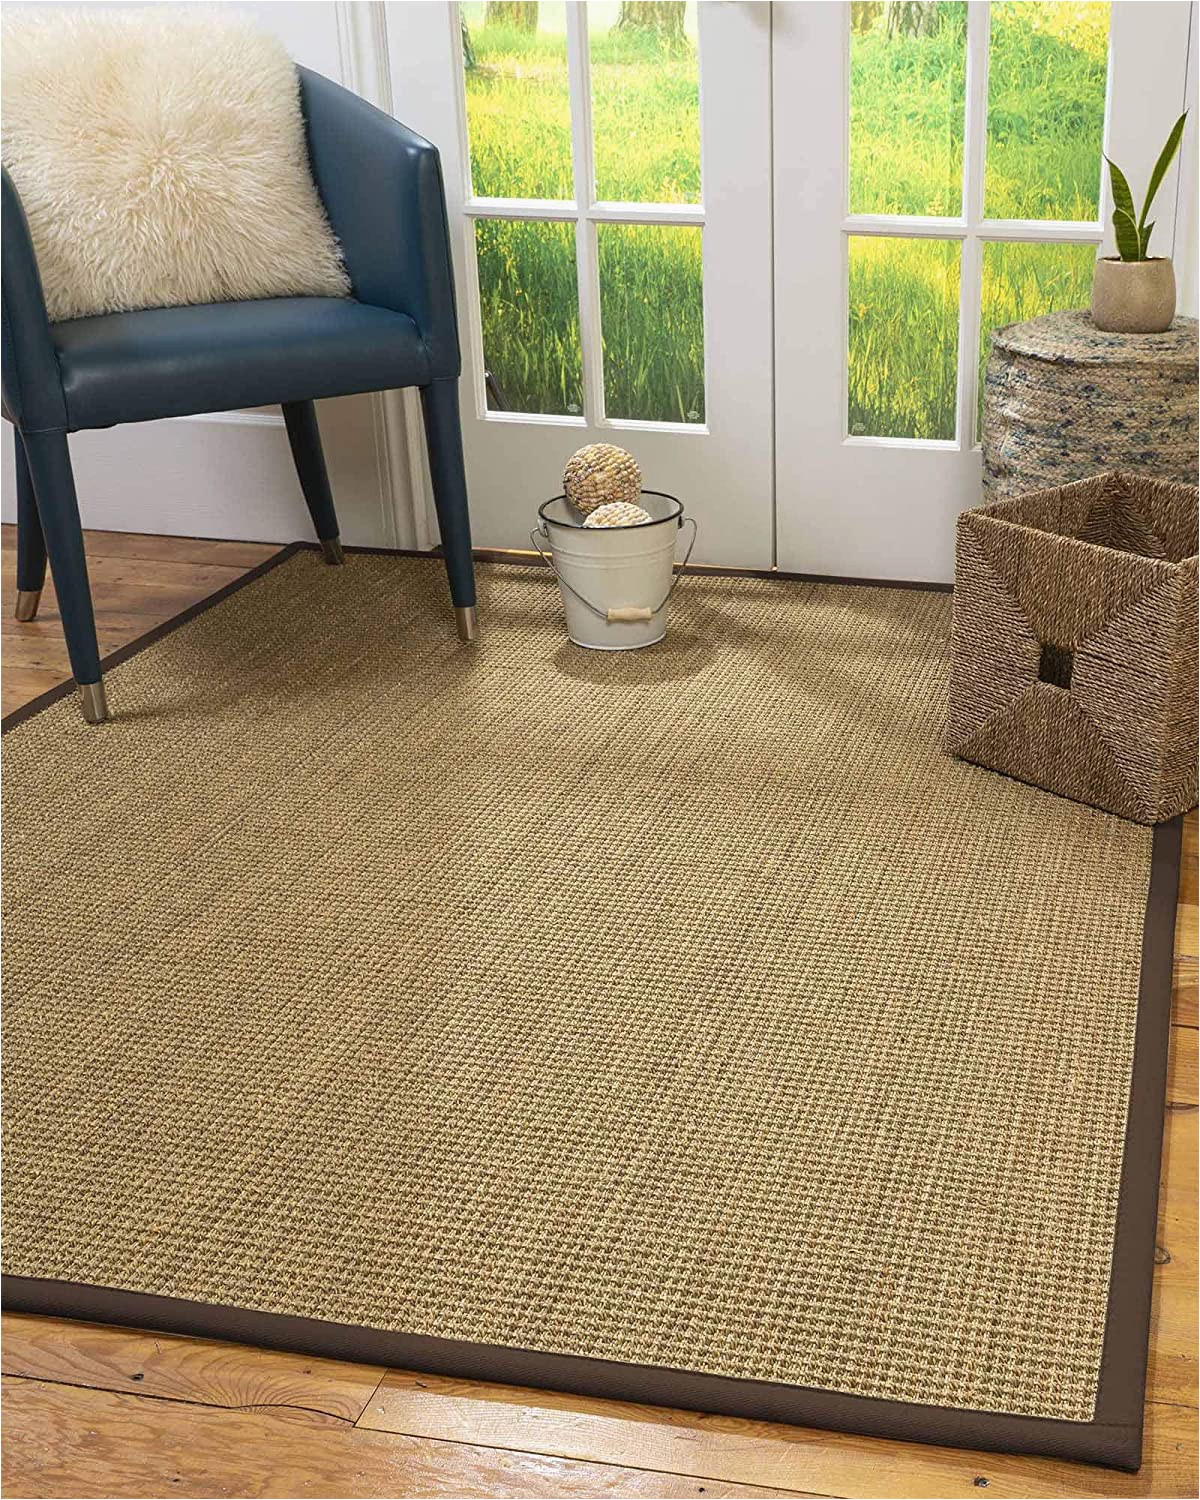 Extra Large area Rugs Amazon Amazon Natural area Rugs Hamptons Seagrass Rug Extra